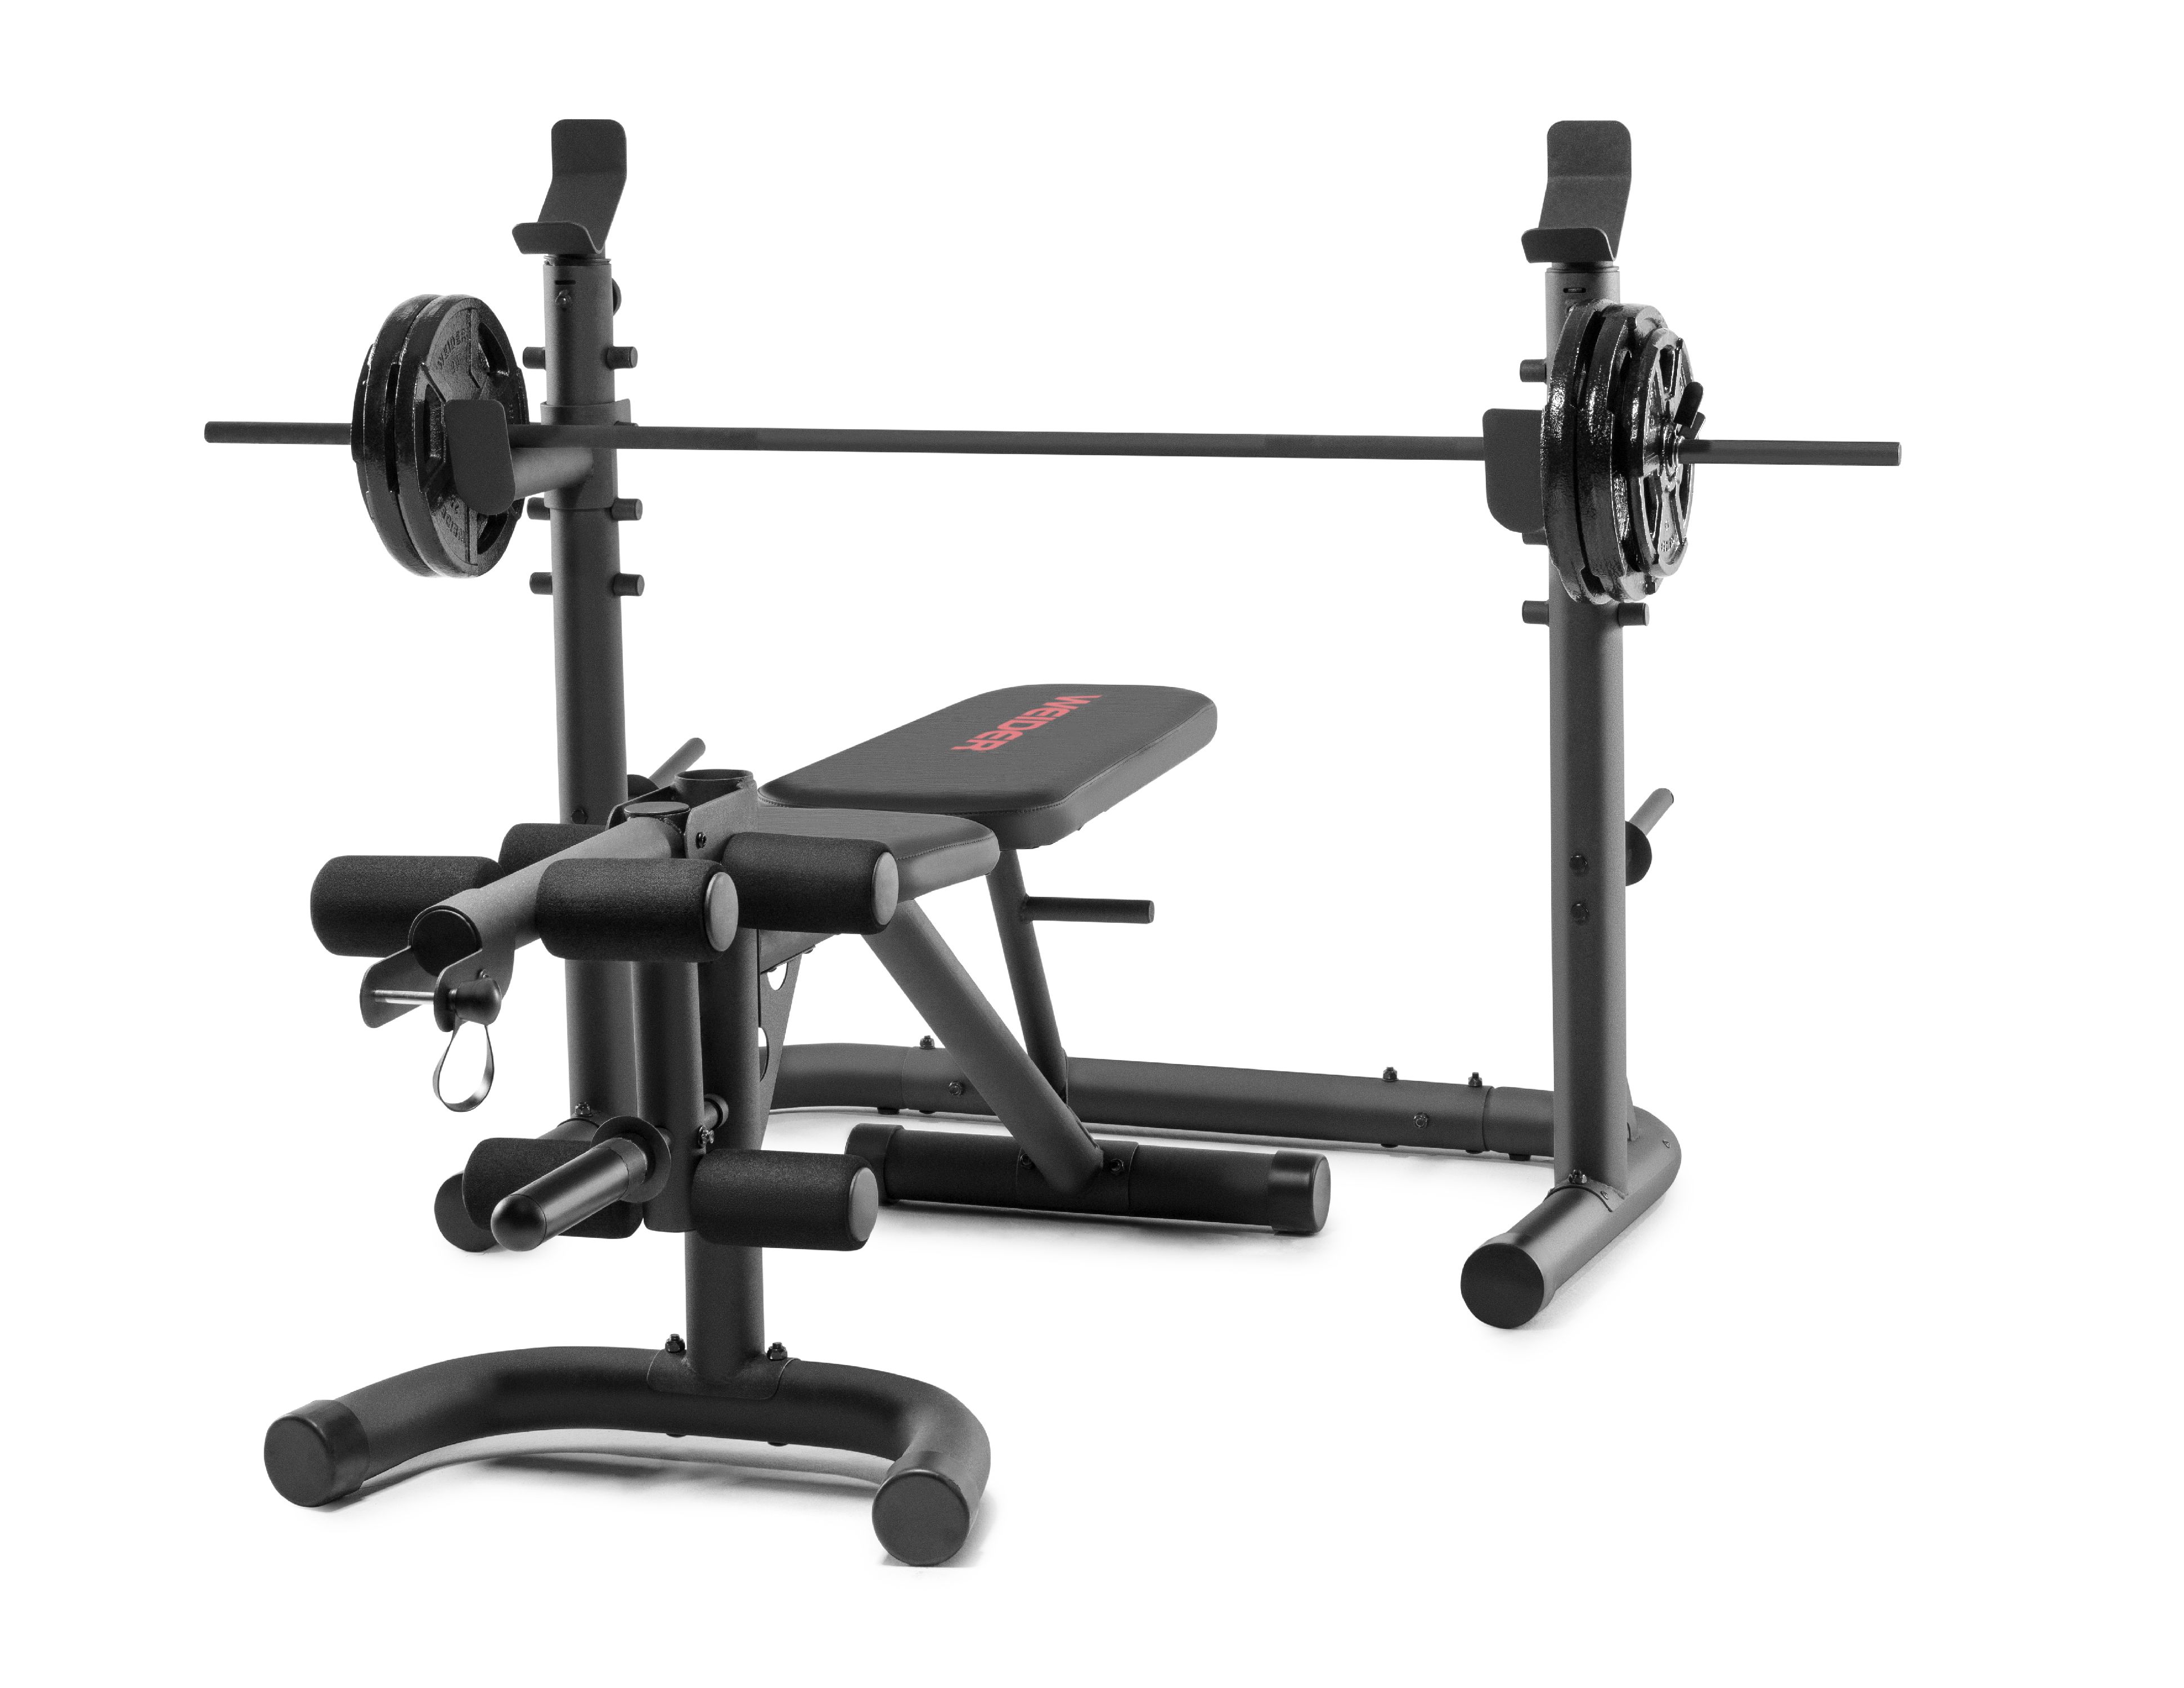 Simple Weider Xrs 20 Olympic Workout Bench Walmart for Gym